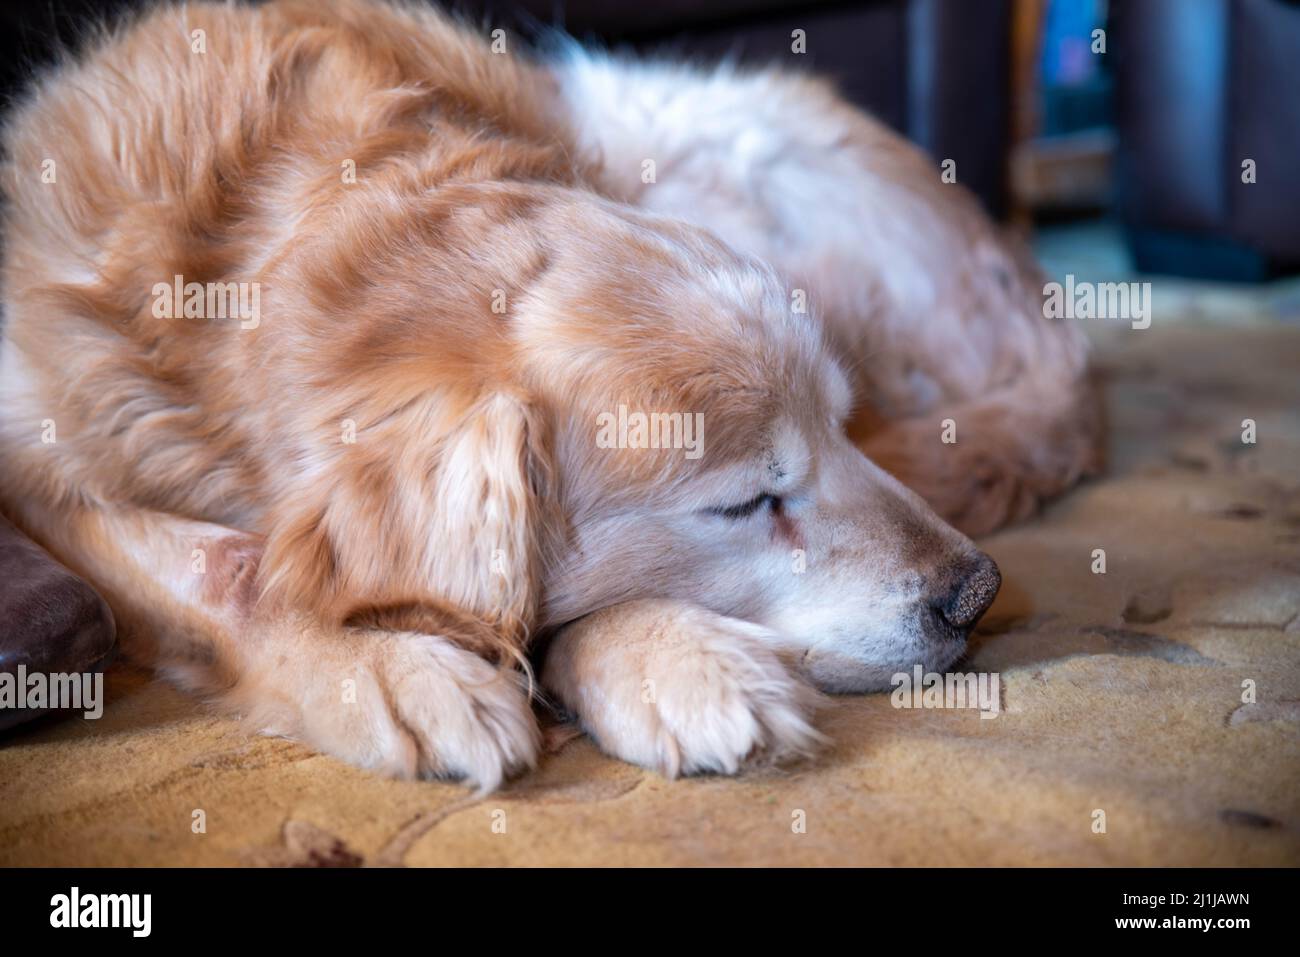 Closeup of sleeping aged golden retriever dog with red and white fur Stock Photo